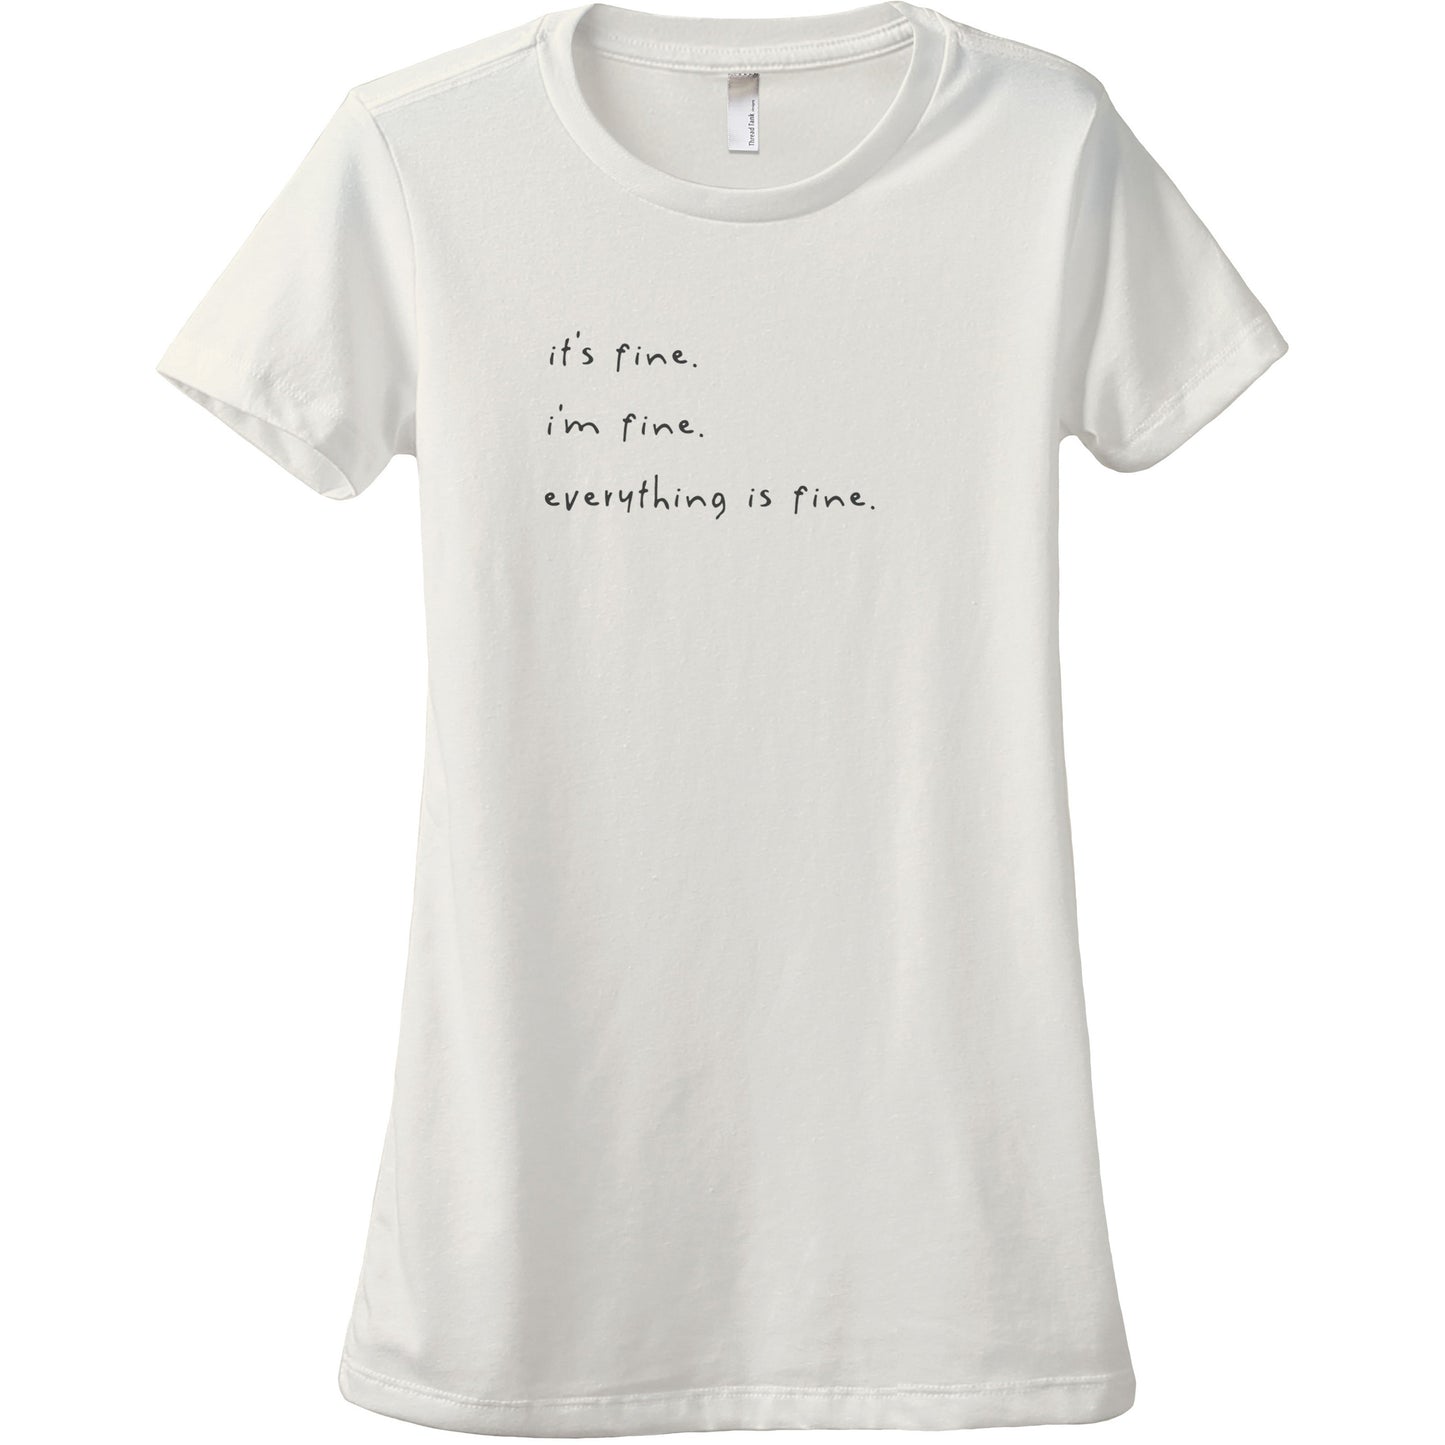 6. I'm Fine Everything Is Fine - Stories You Can Wear by Thread Tank